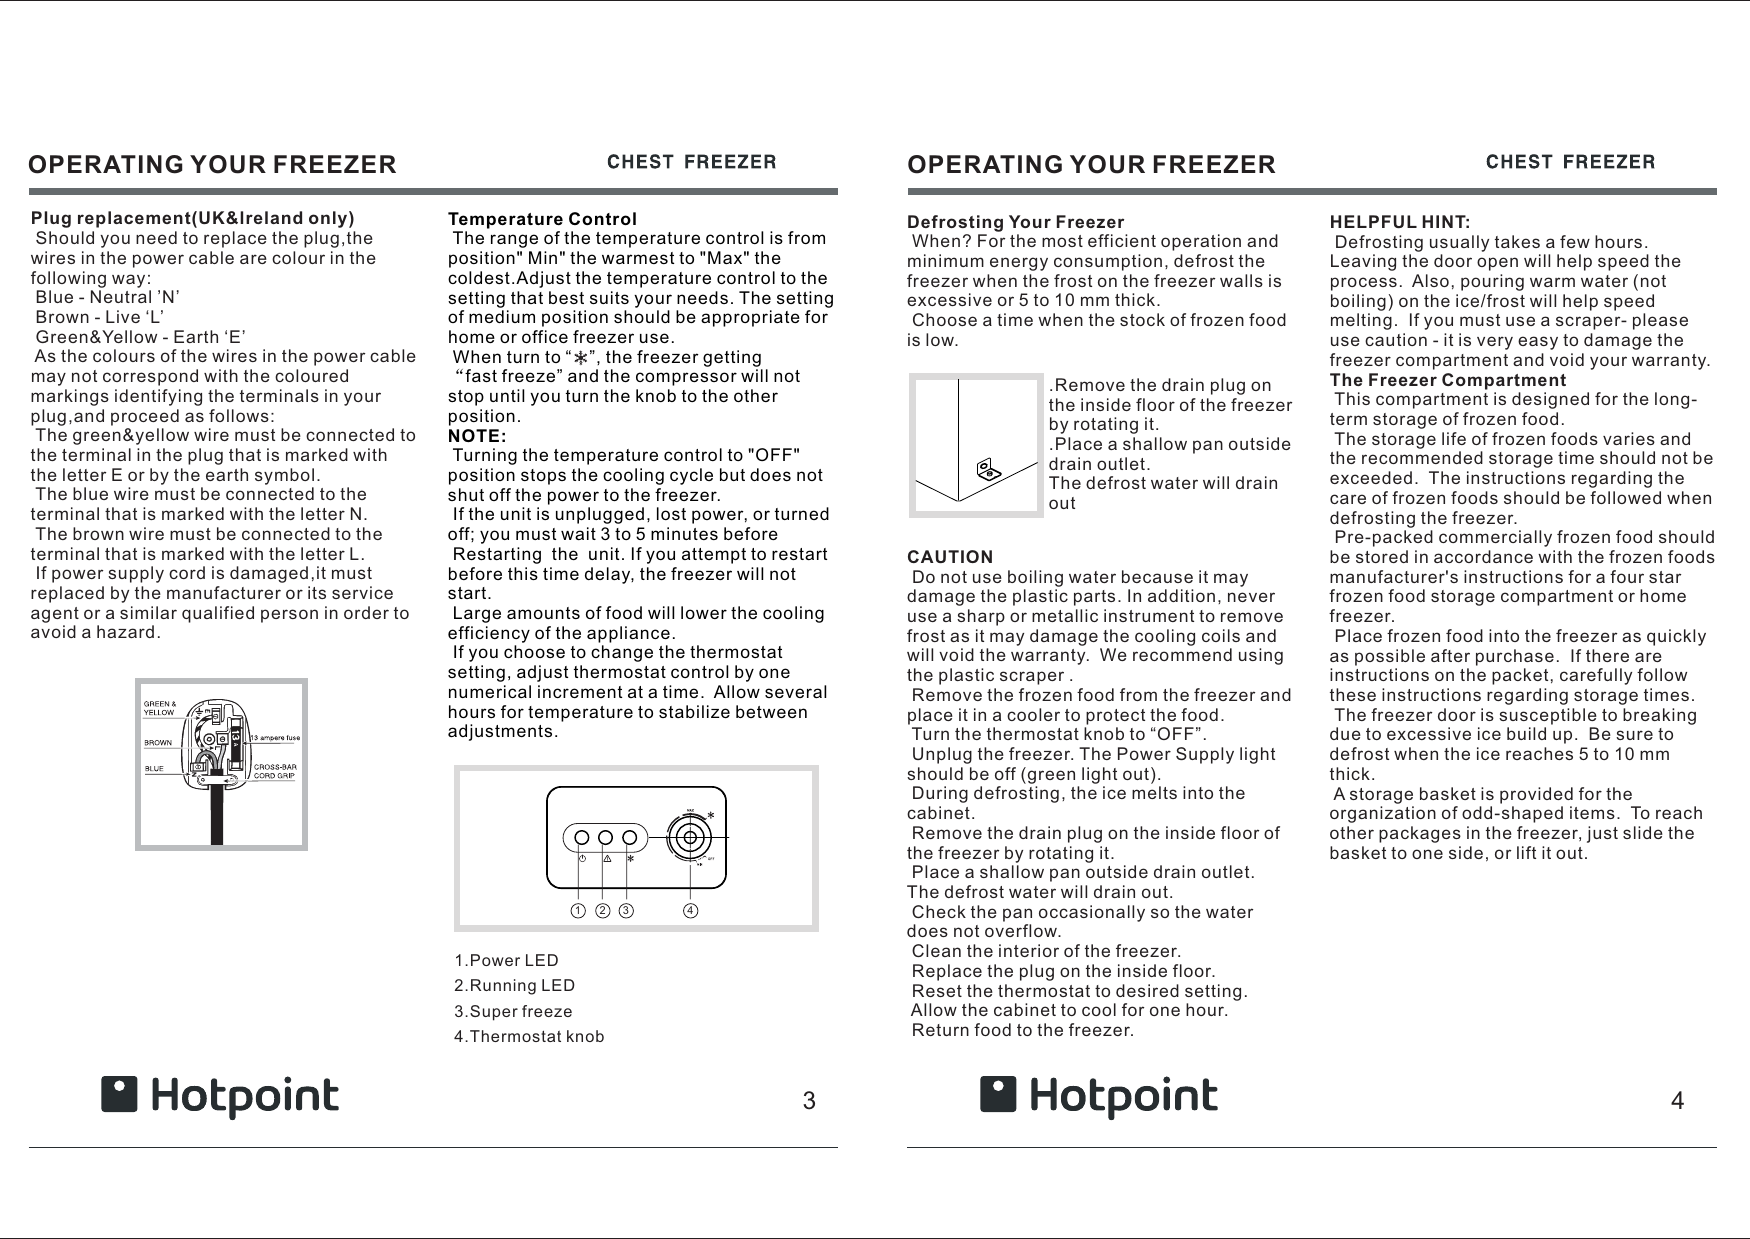 Page 2 of 5 - Hotpoint Hotpoint-Rcaa-Users-Manual- 鍥惧舰3  Hotpoint-rcaa-users-manual